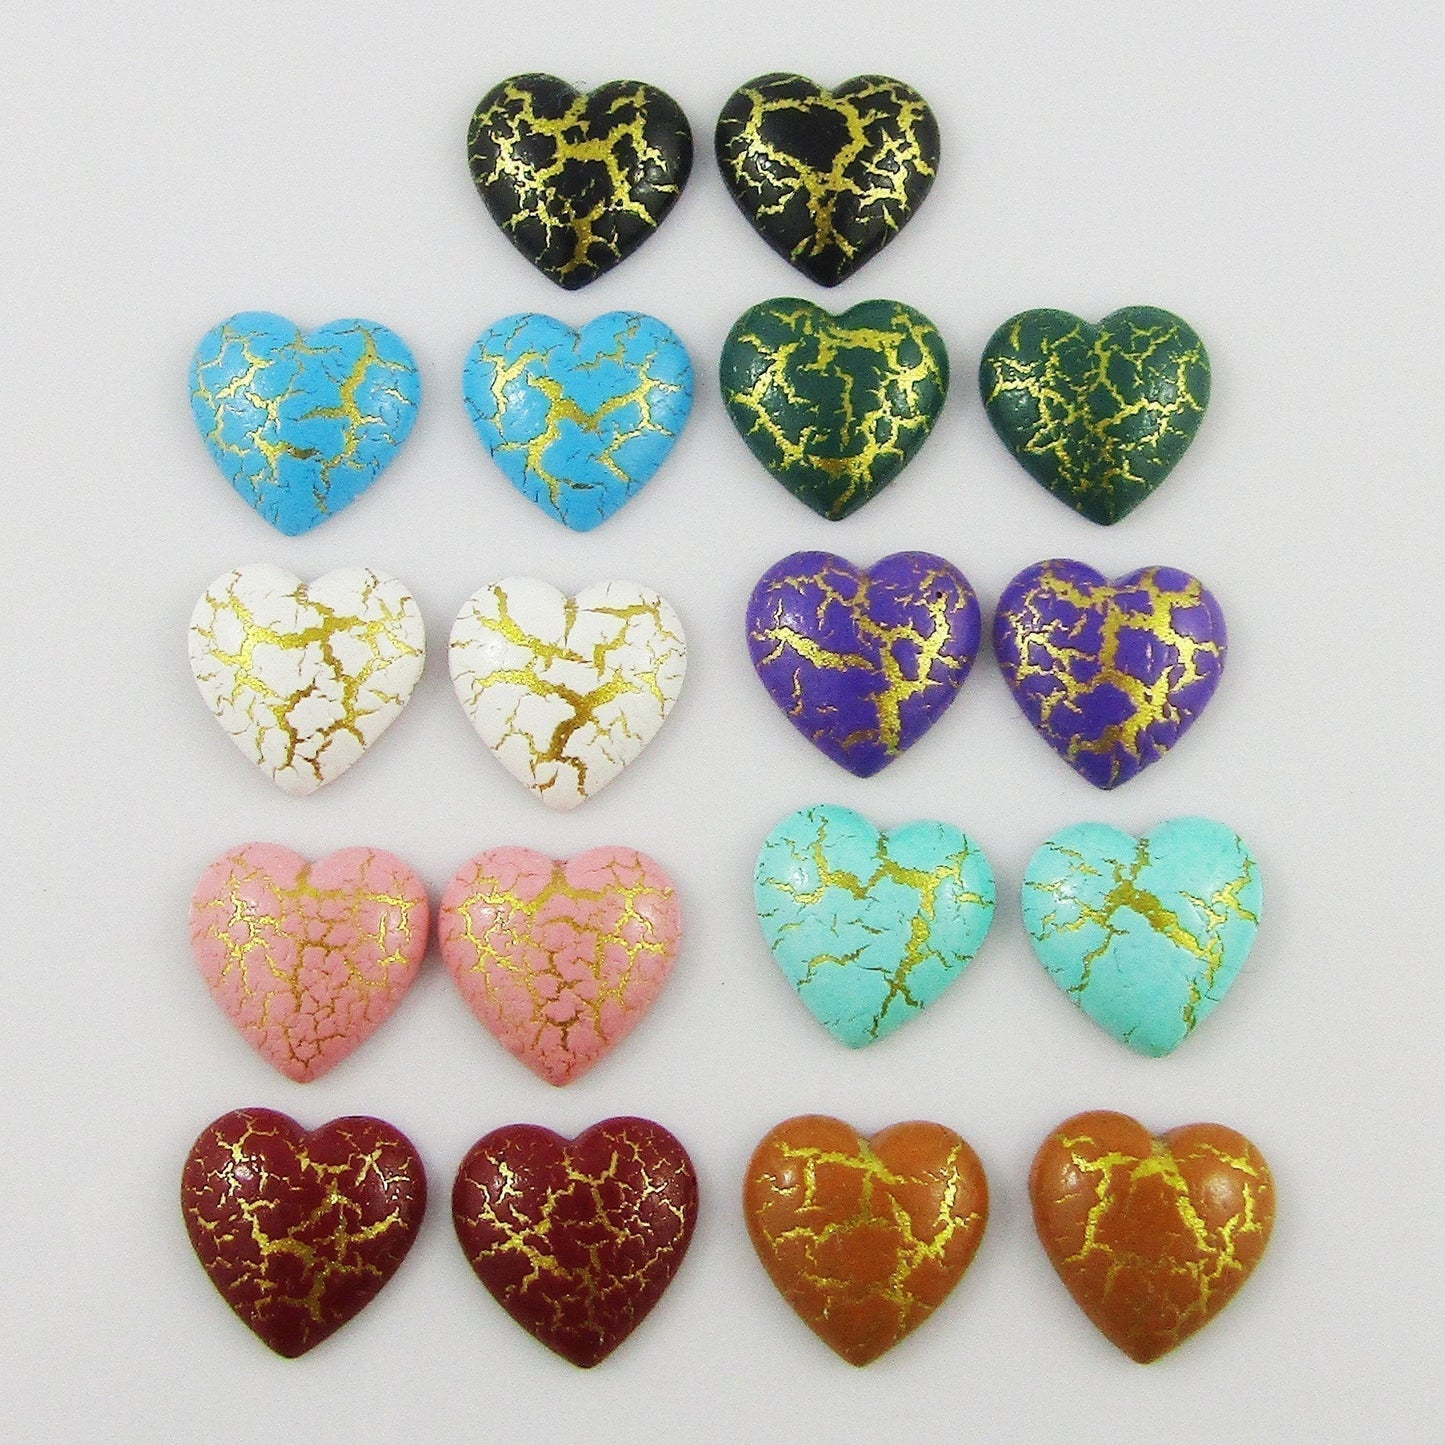 Resin Metallic Crackle Heart Cabochon 12mm Pick 10 or 20 pieces in random pairs